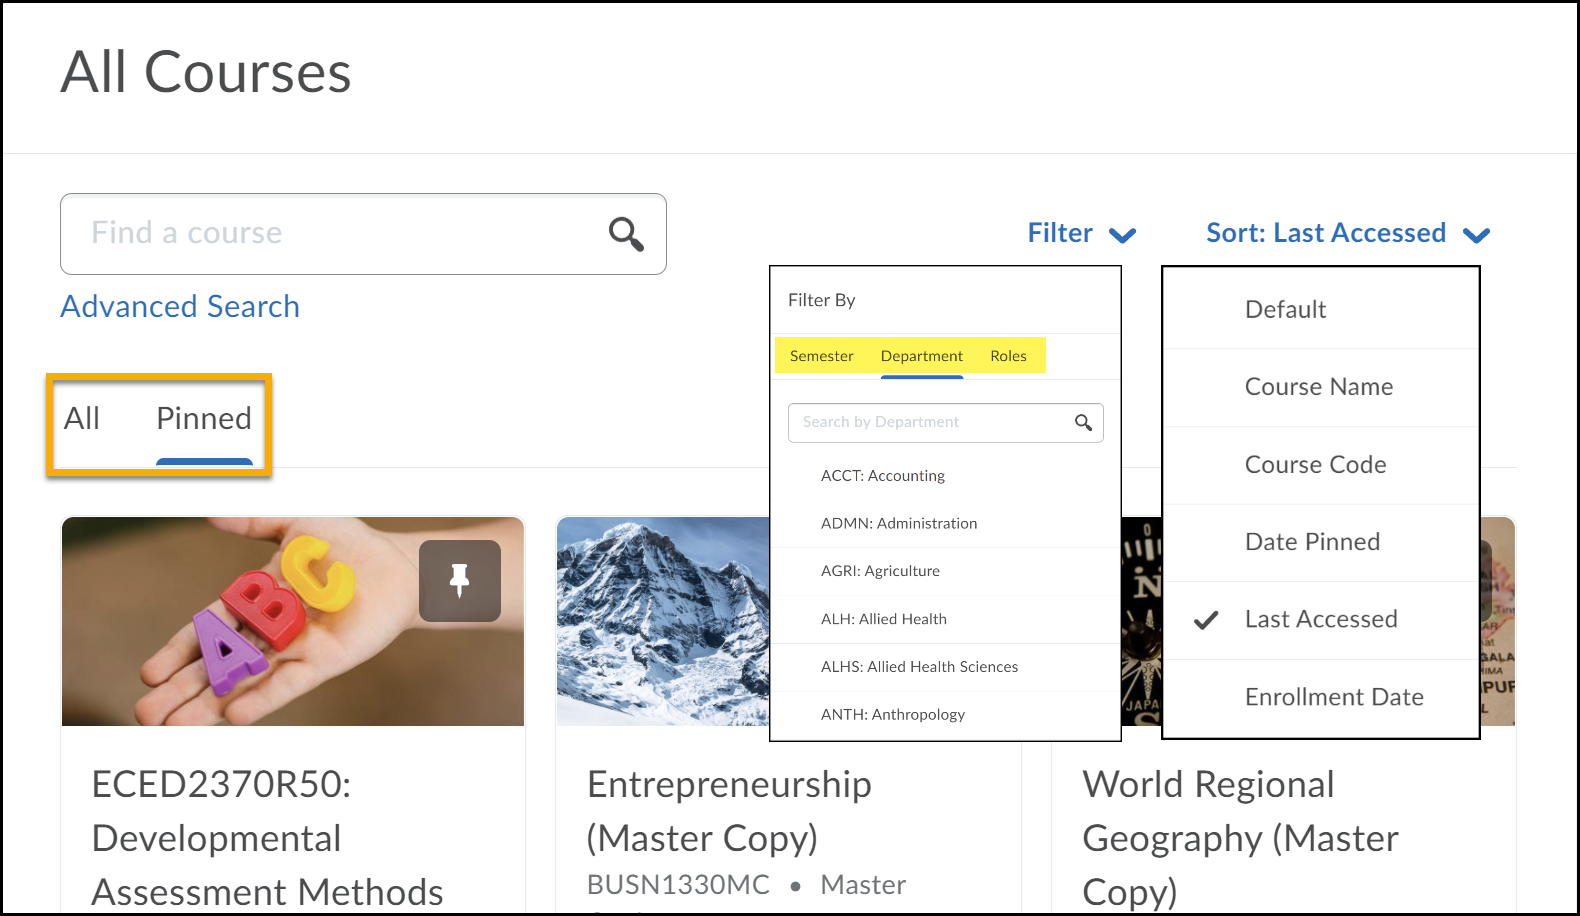 My Courses shown as tiled images for each course. There is a pin symbol to choose or a View All Courses button that leads to a search box for long lists.